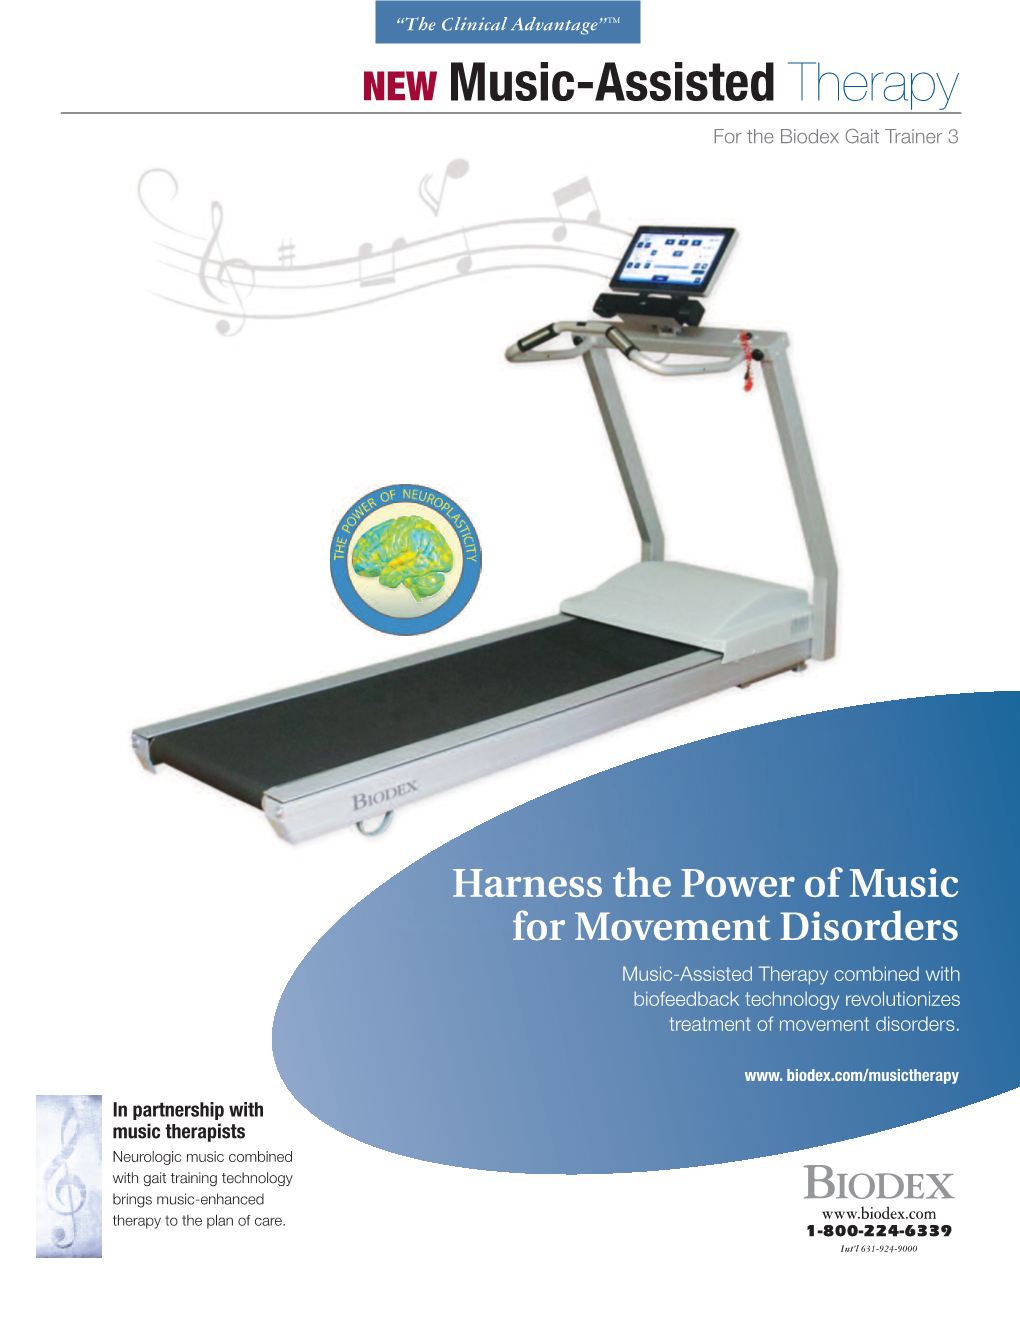 Biodex Music-Assisted Therapy for the Gait Trainer 3